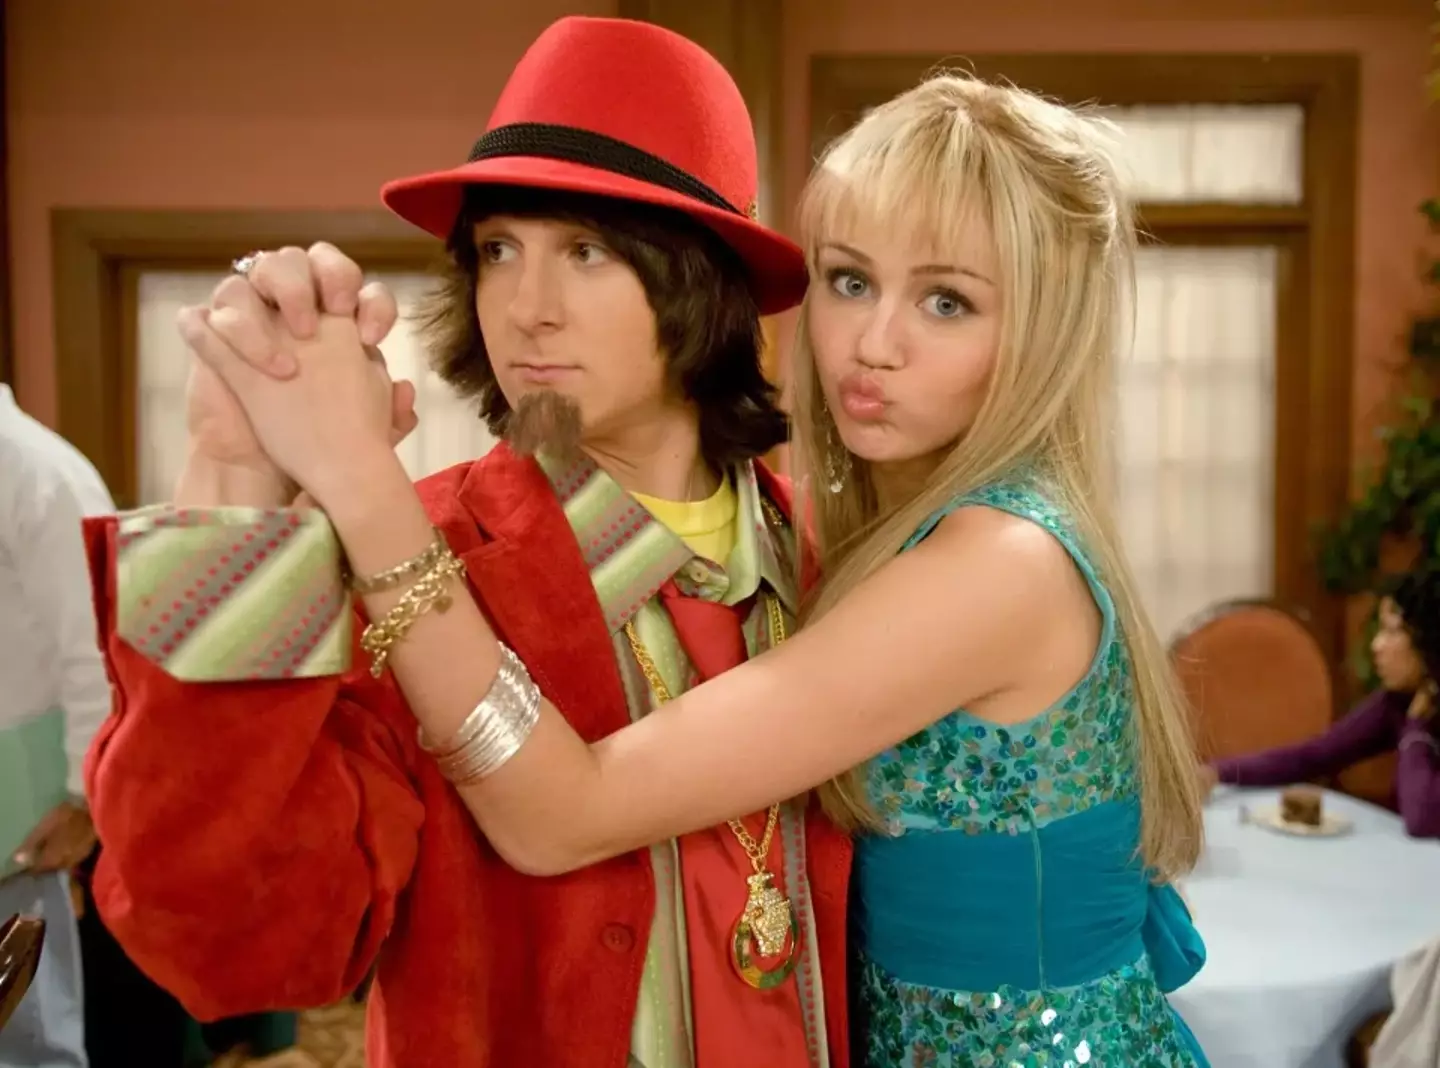 Mitchel Musso and Miley Cyrus in Hannah Montana.